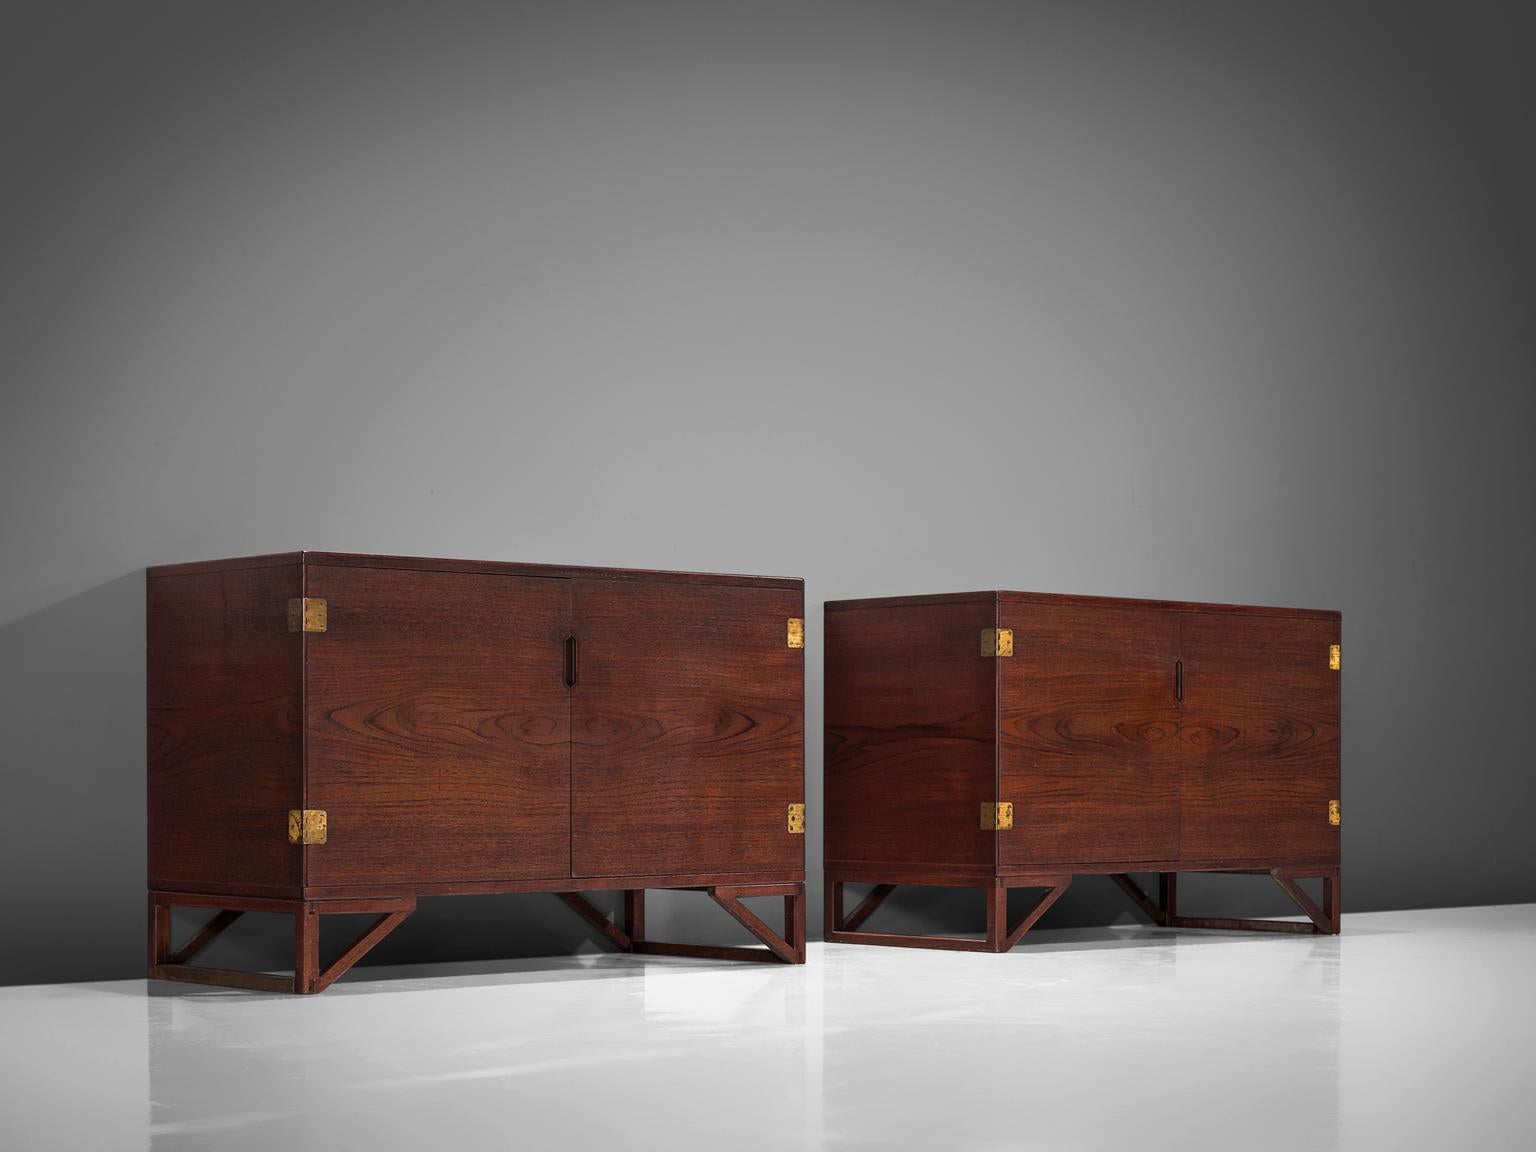 Svend Langkilde for Illum Bolighus, set of 2 cabinets in teak and brass, Denmark, 1965.

Modest and refined rosewood cabinets designed by Svend Langkilde, produced by Illums Bolighus. These sideboards are equipped with Langekilde's signature